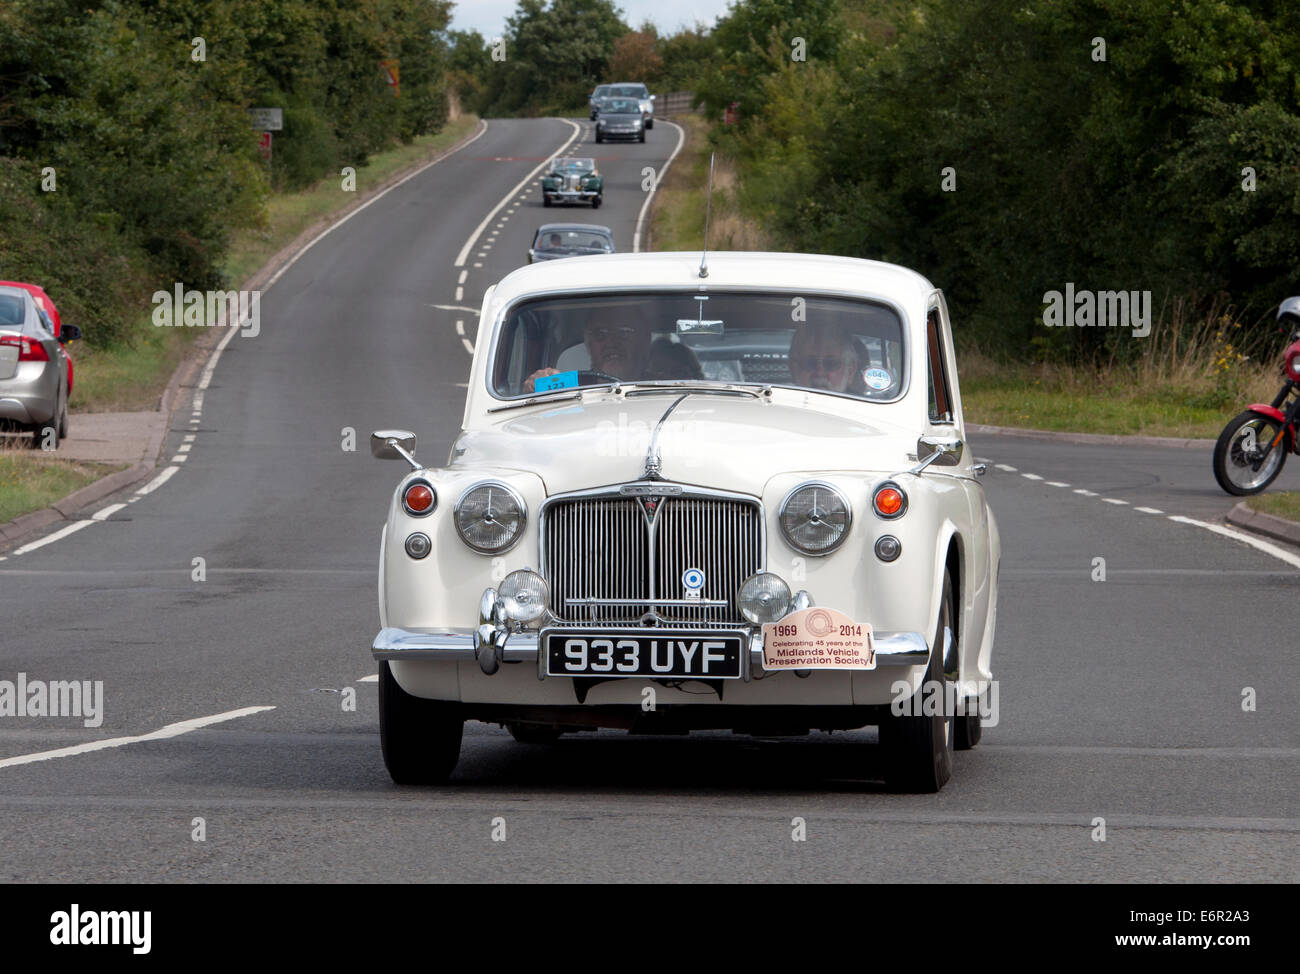 Rover 100 car on the Fosse Way road, Warwickshire, UK Stock Photo